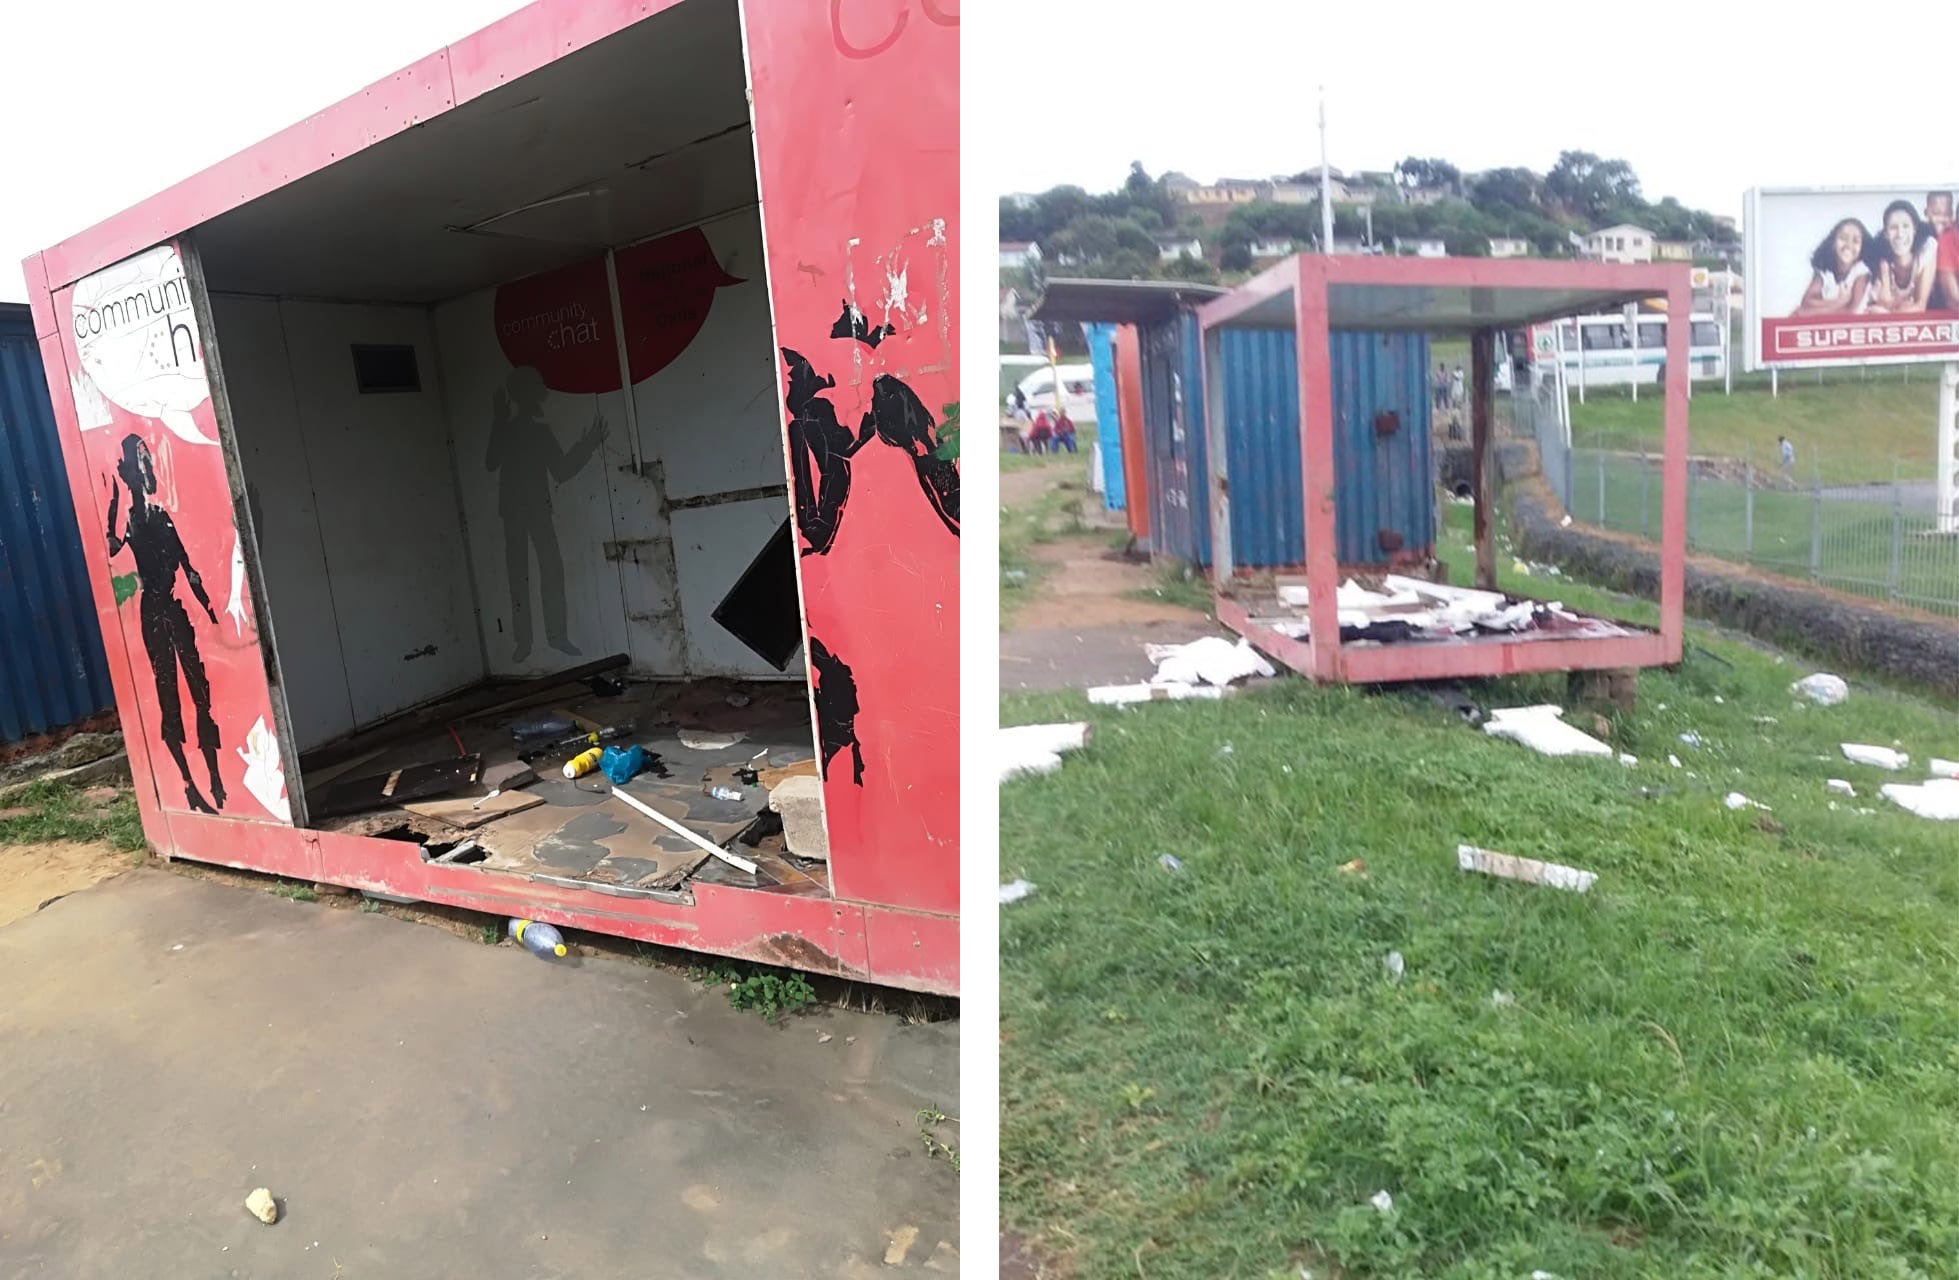 Two photos of a destroyed shipping container